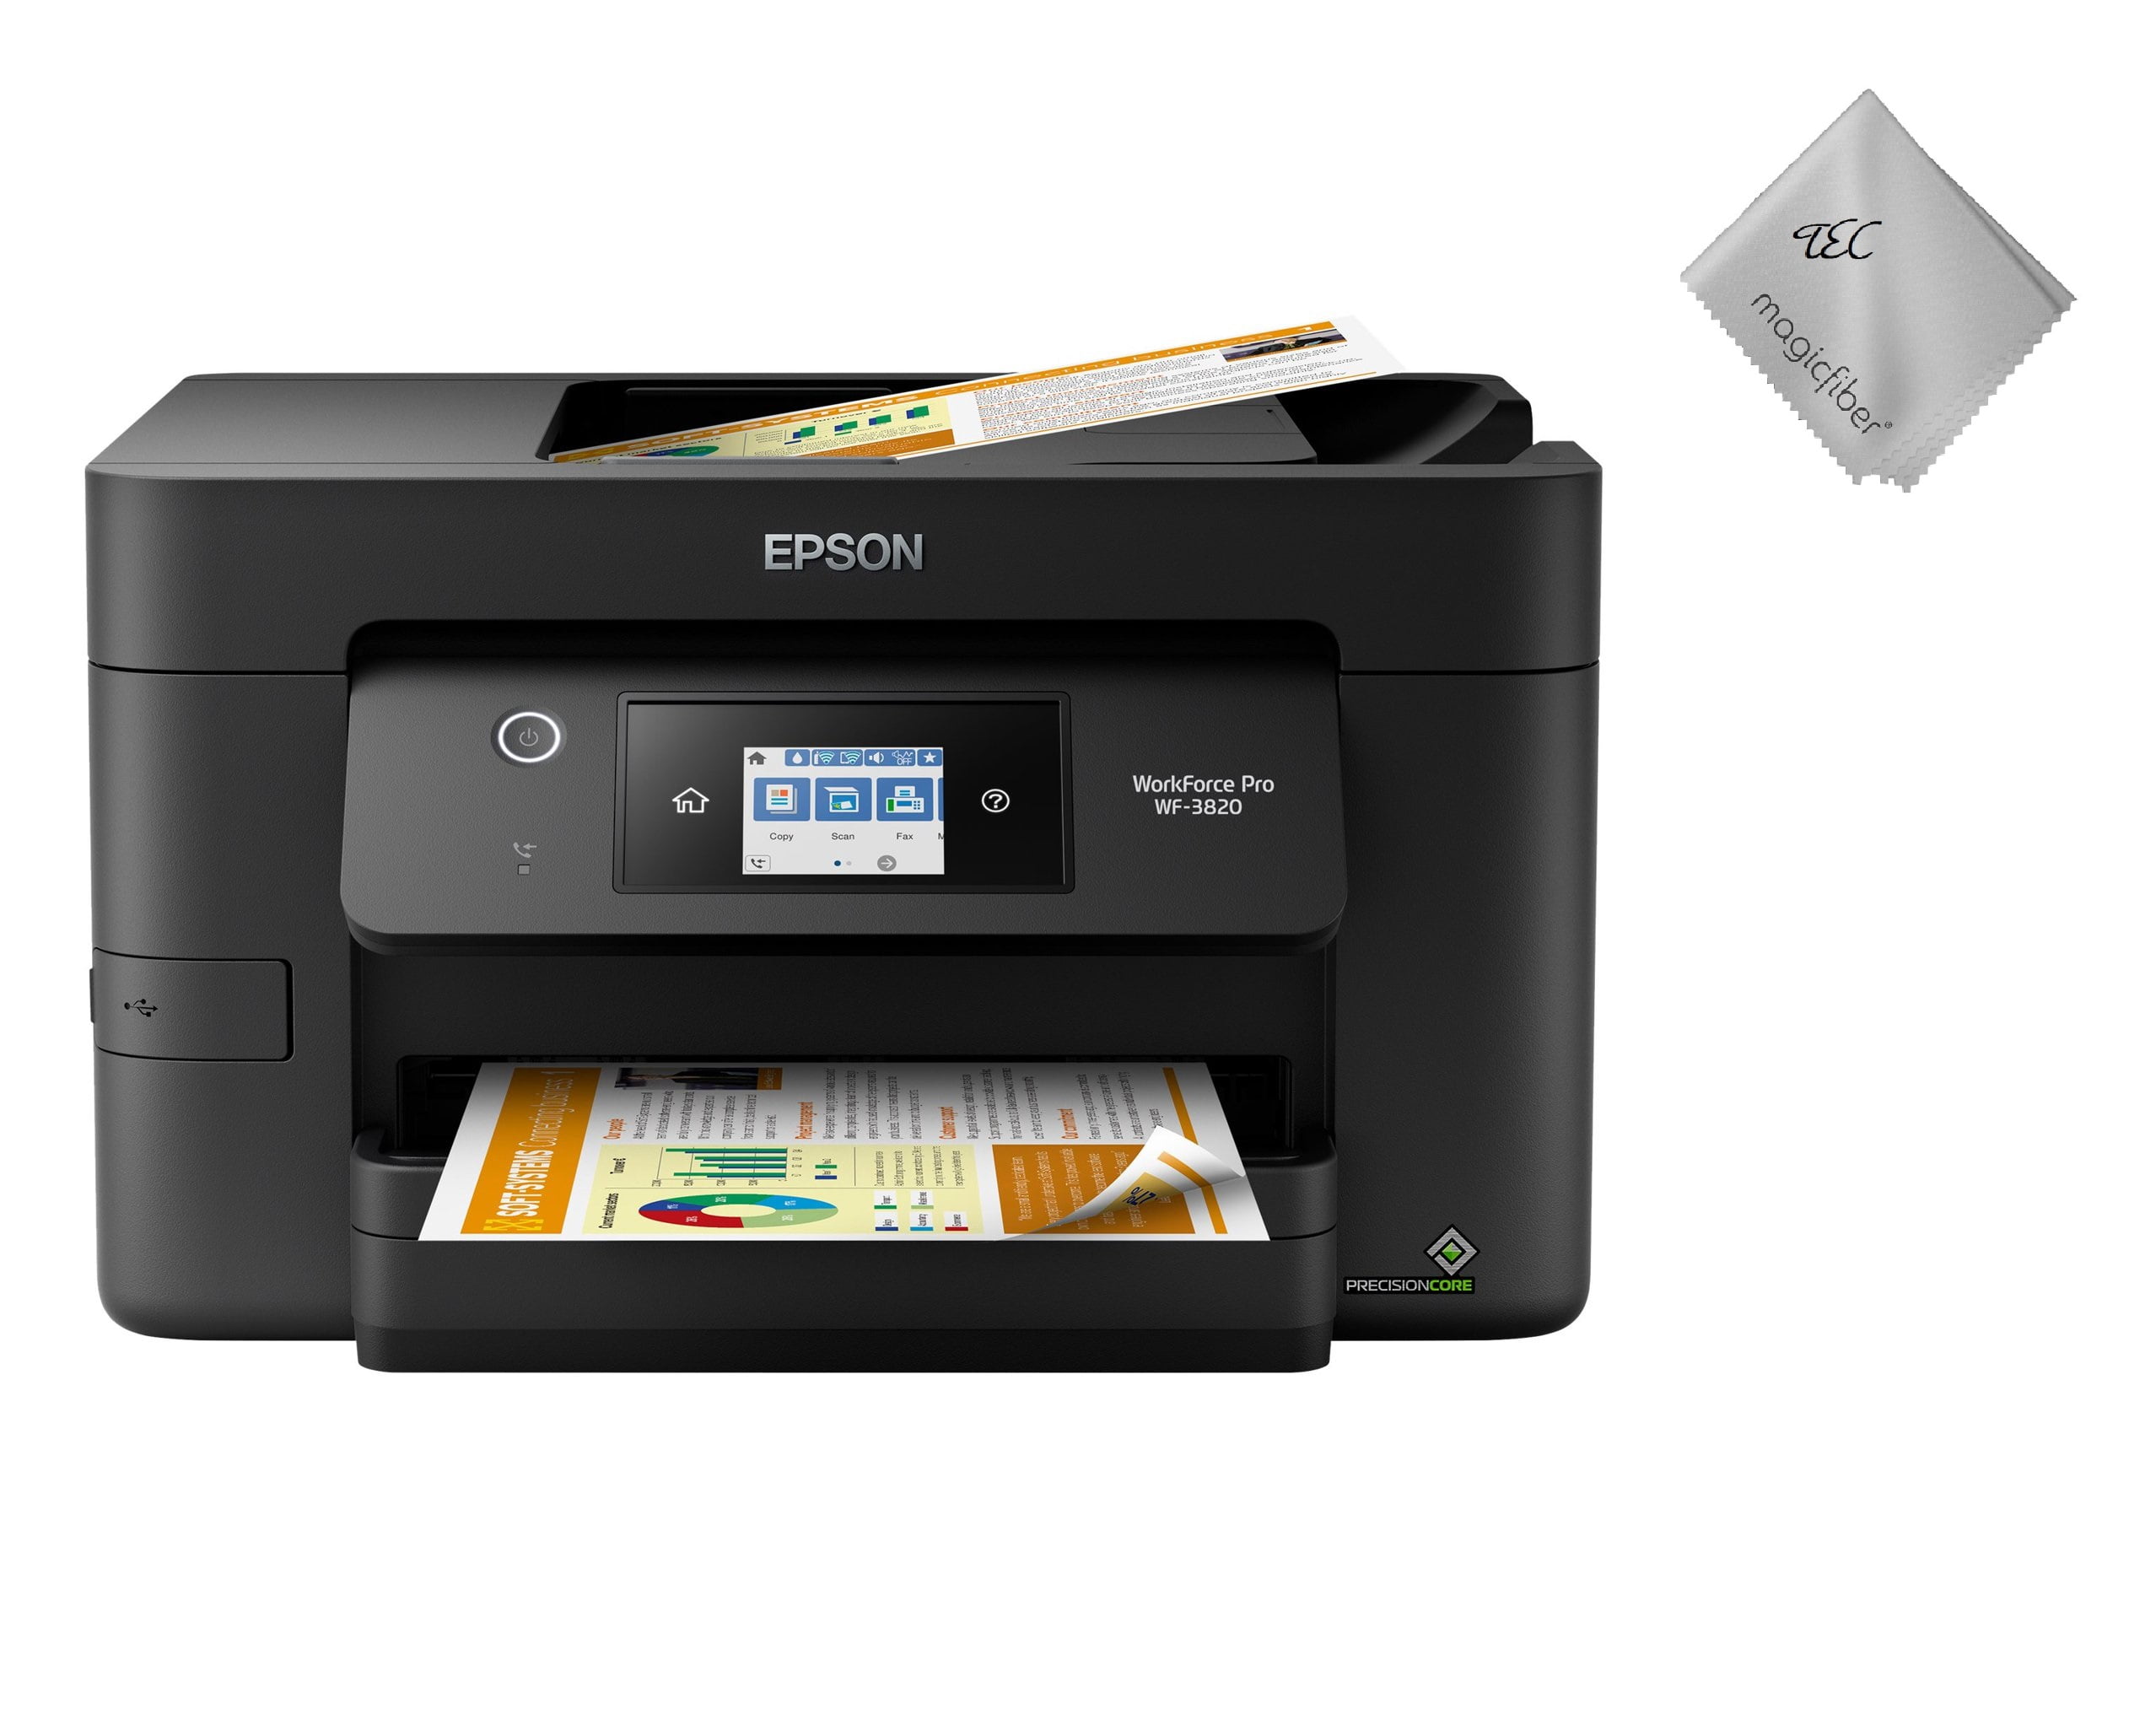 Epson WorkForce Pro WF-3820 Wireless All-in-One Printer with Auto 2-sided  Printing, 35-page ADF, 250-sheet Paper Tray and 2.7 Color Touchscreen 